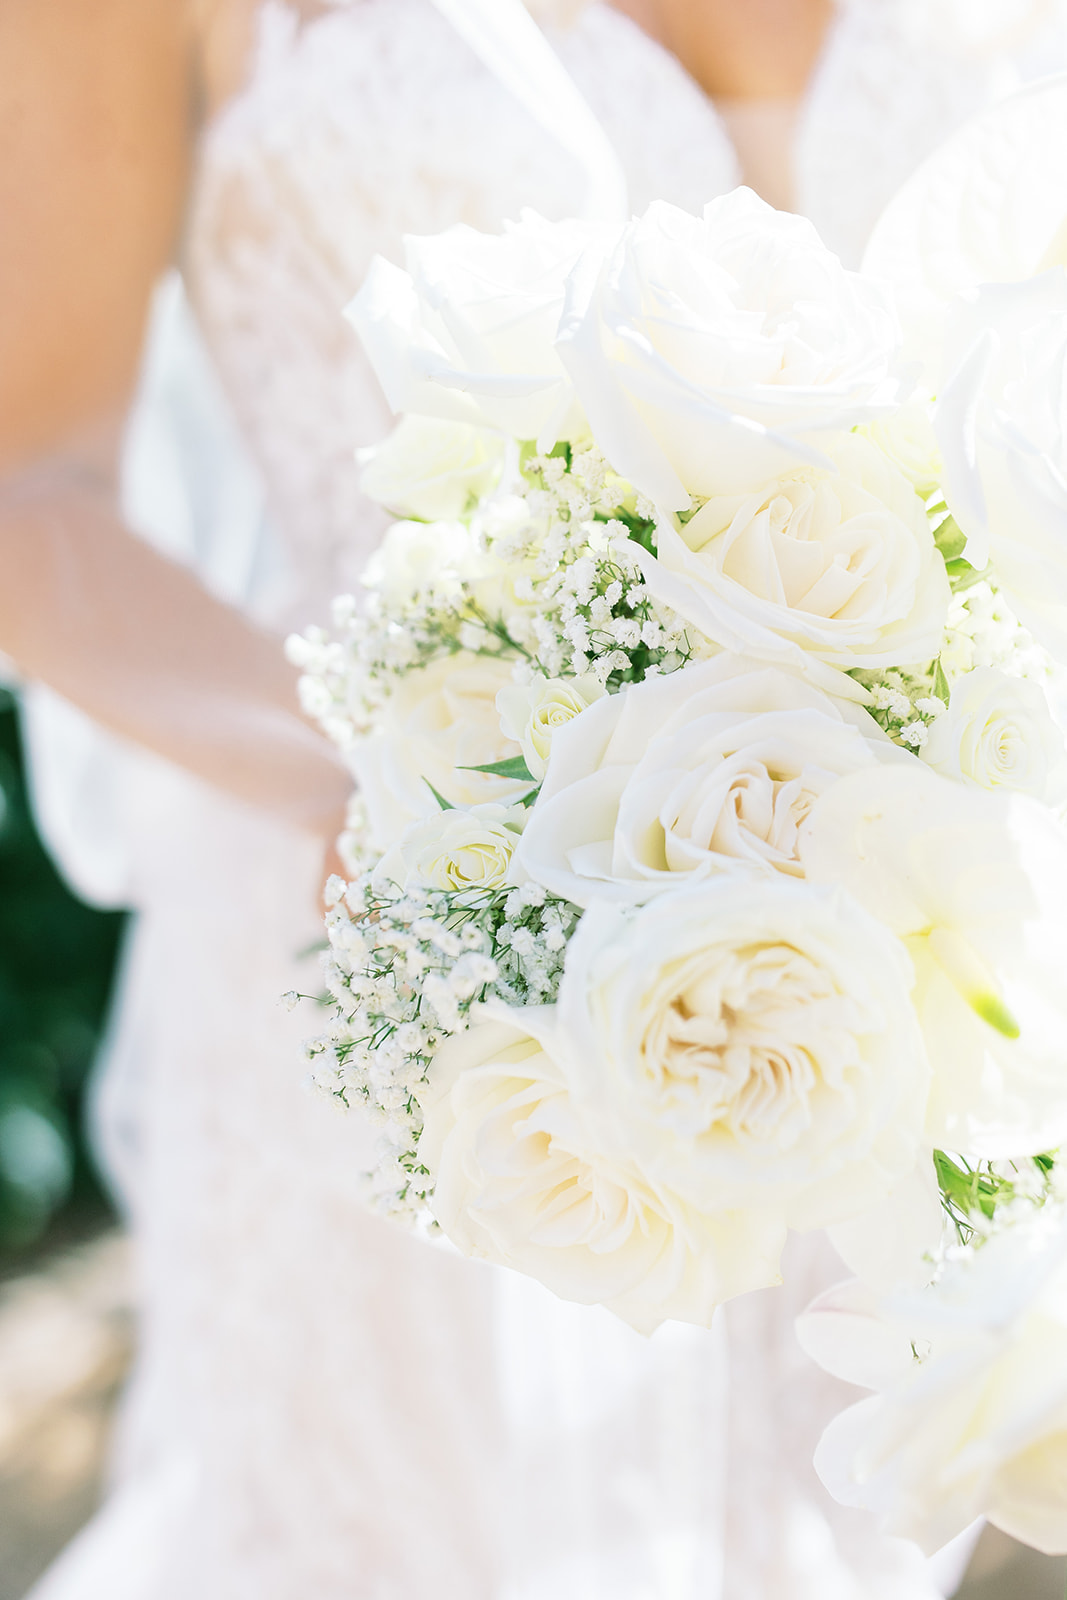 White roses and baby's breath bridal bouquet.